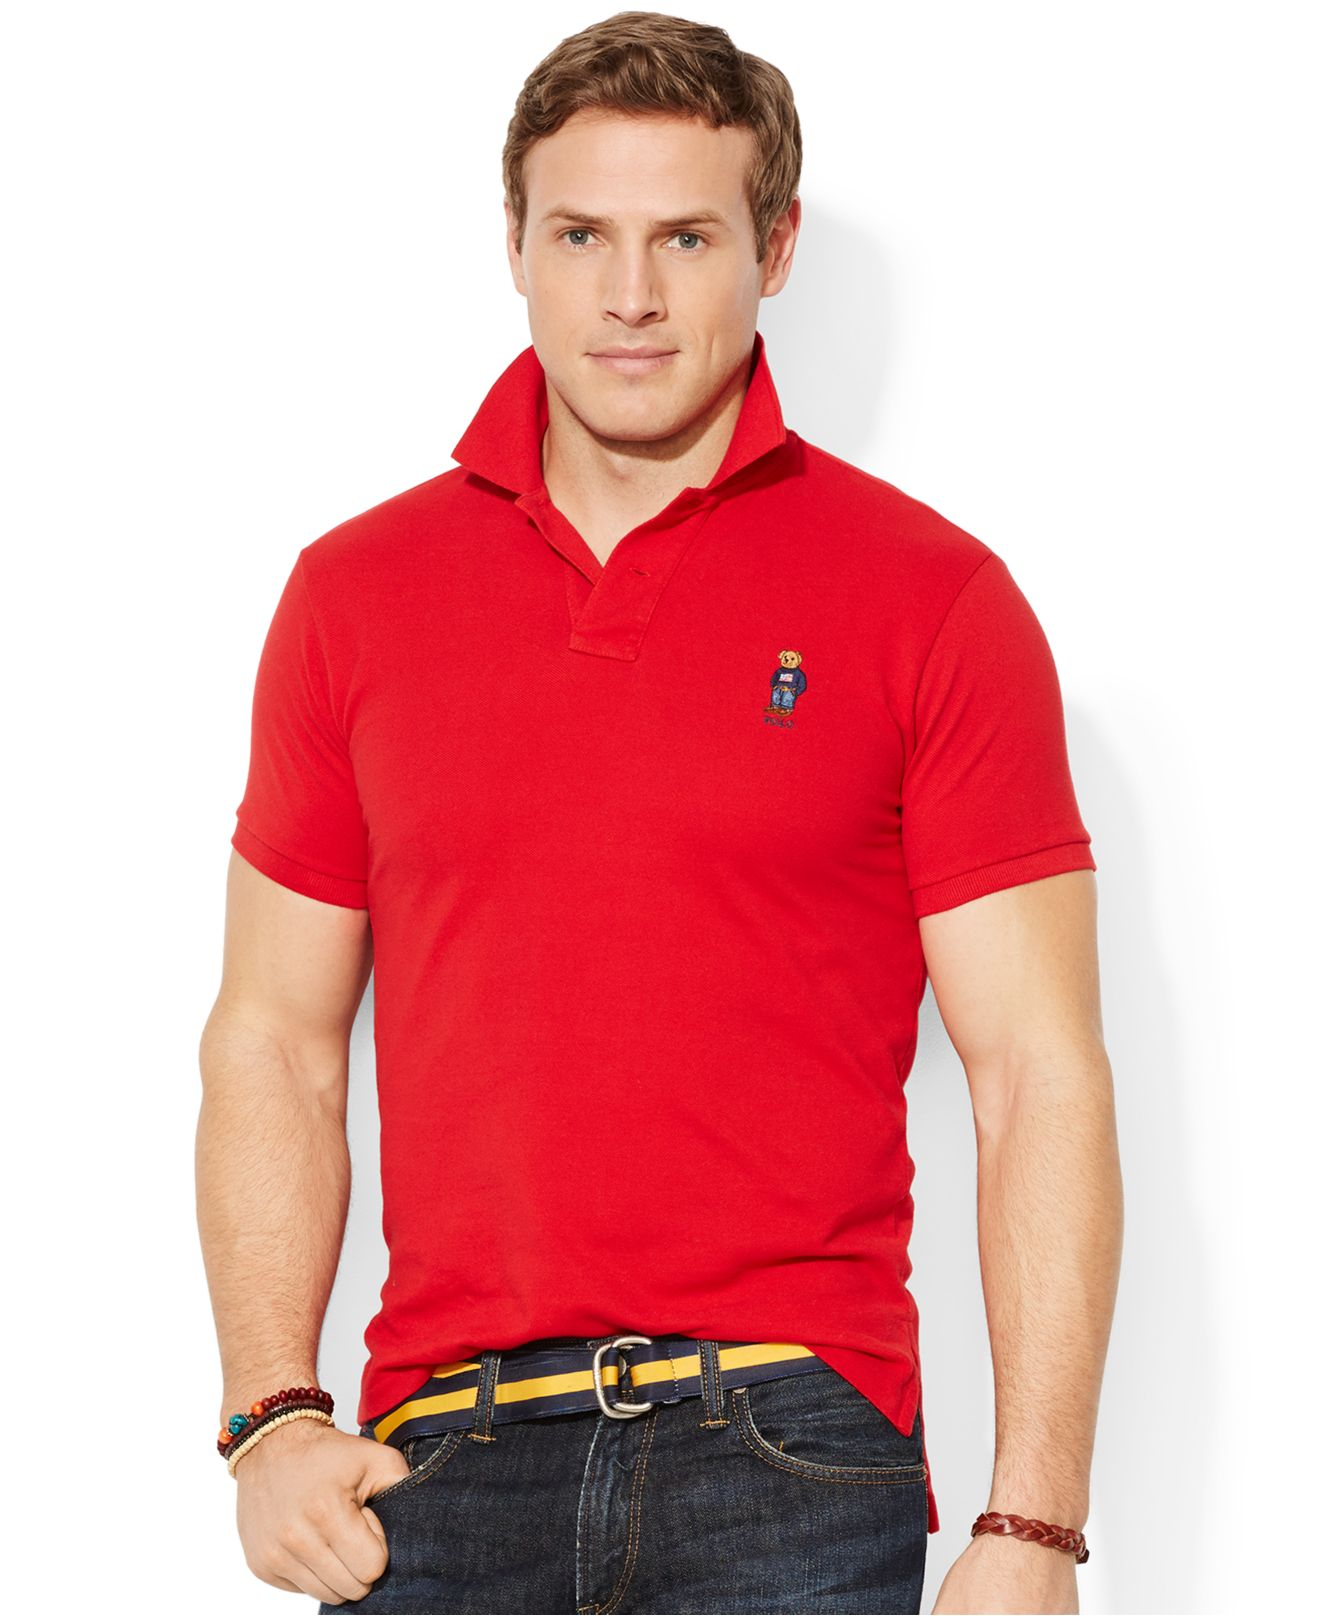  Polo  Ralph  Lauren  Big And Tall Classic Fit Polo  Bear  Mesh 